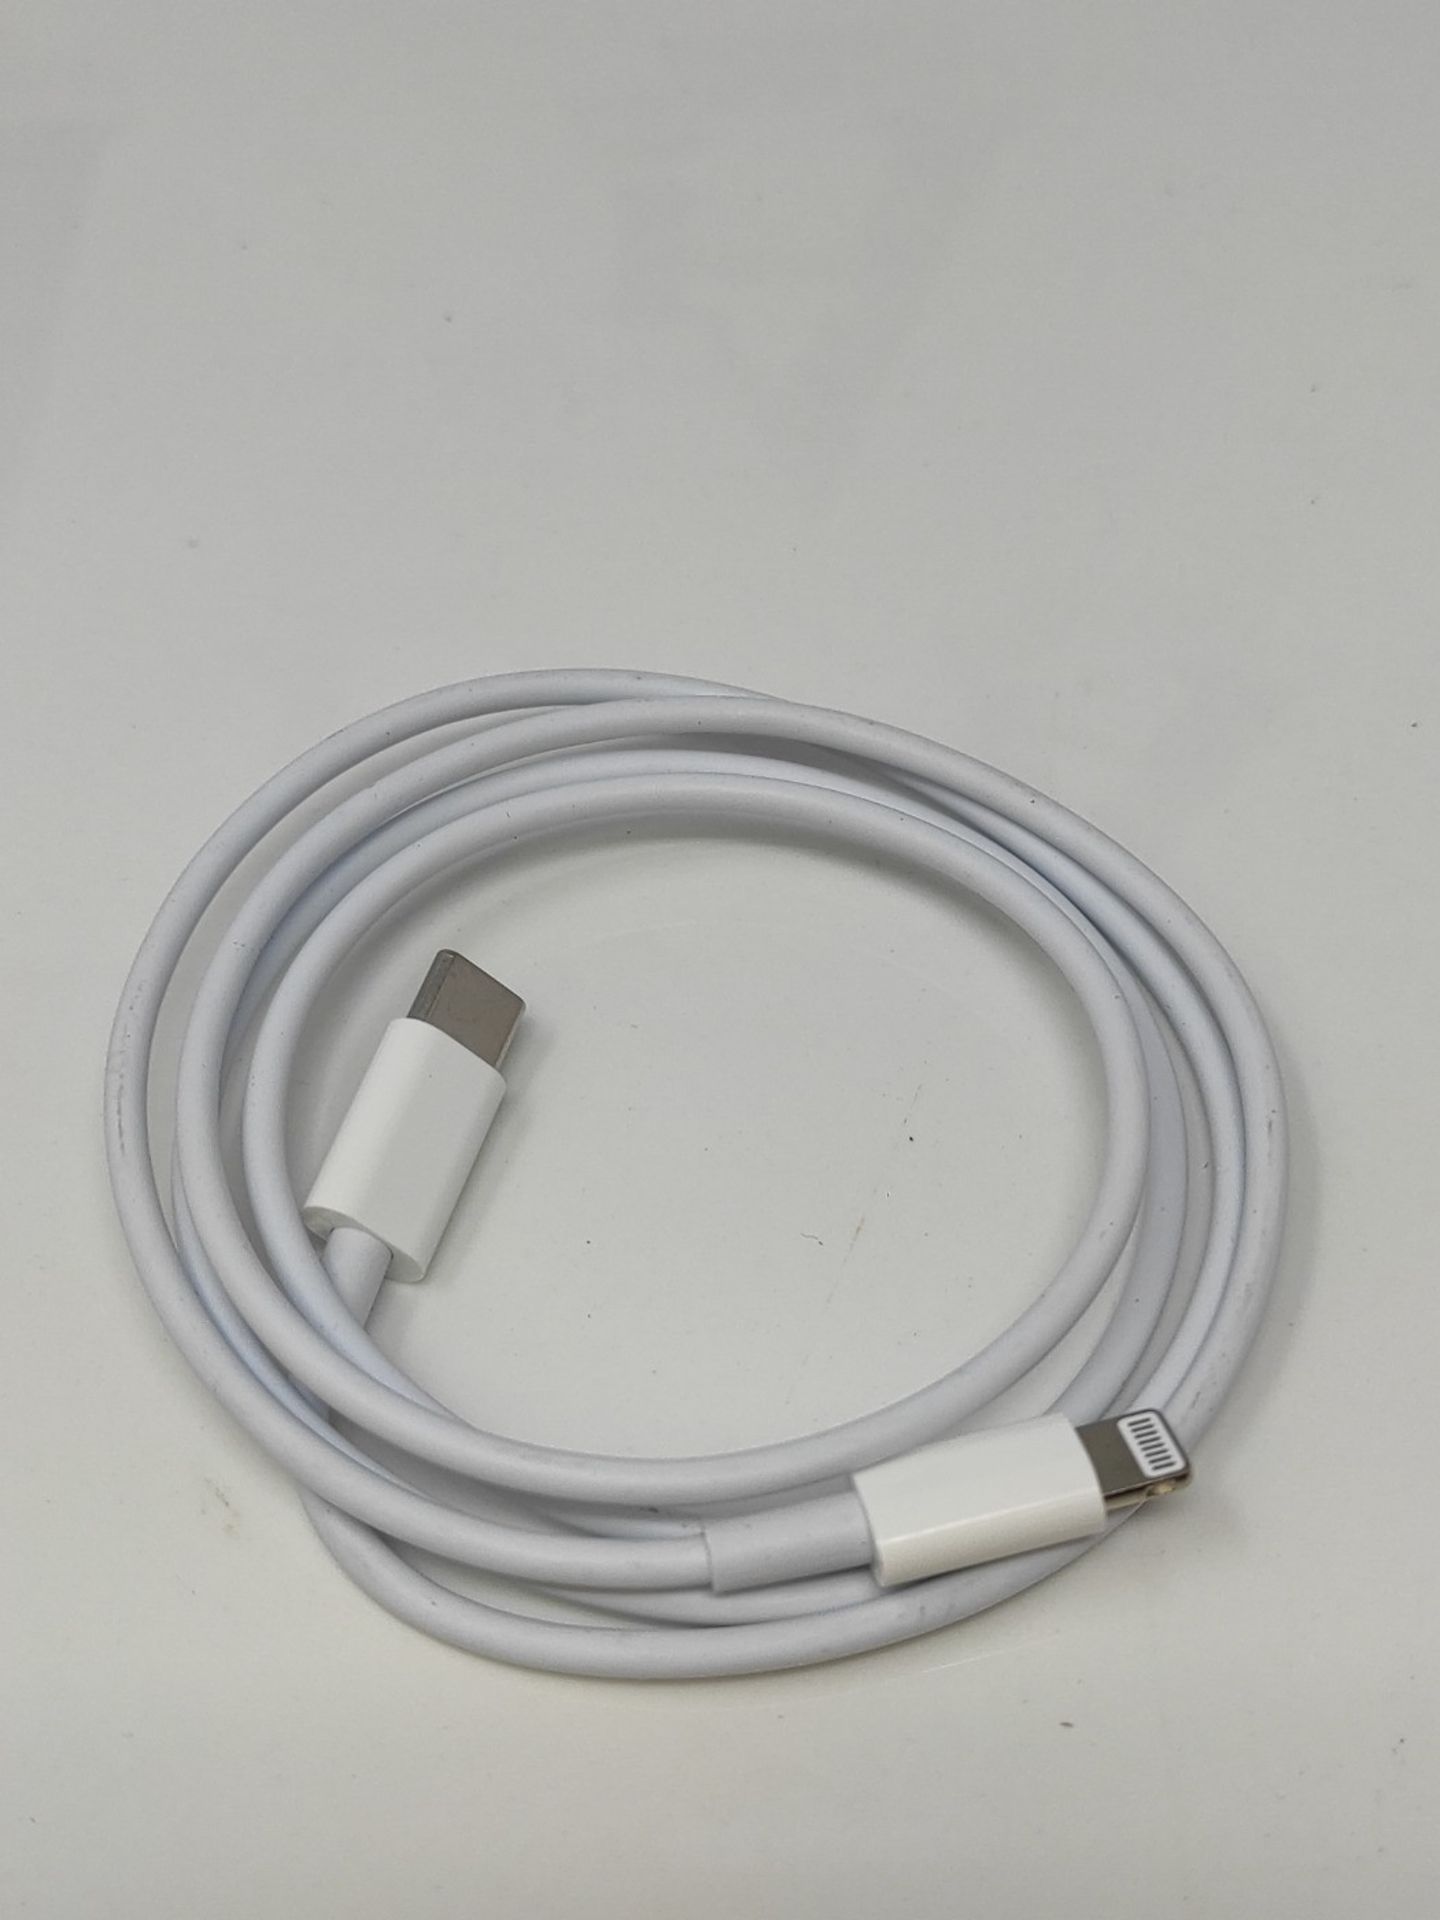 Apple USB-C to Lightning Cable (1m) - Image 4 of 4